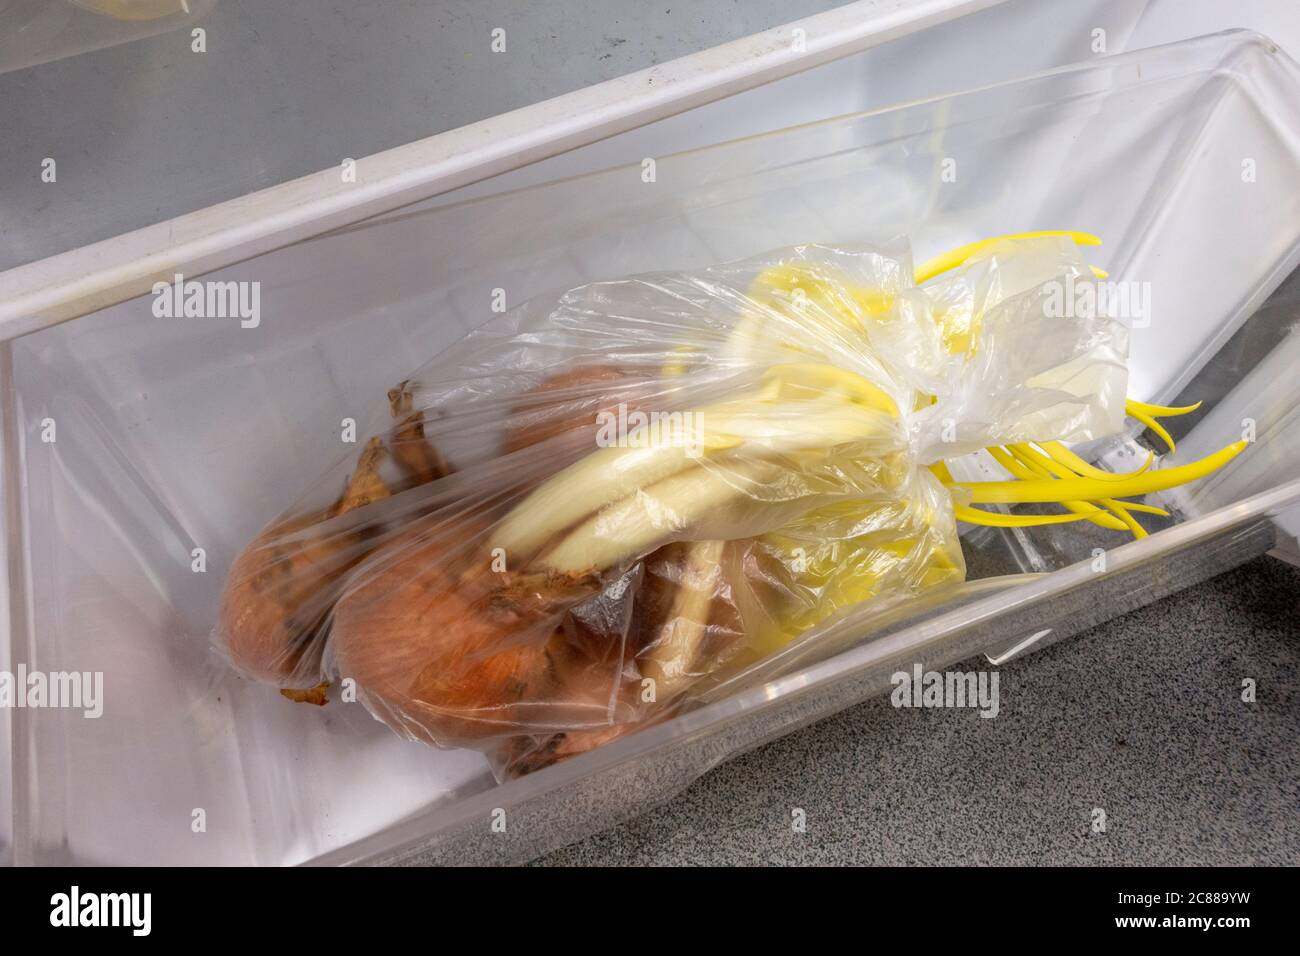 A bag of sprouted onions accidentally left in a work fridge for three months during the Covid-19 lockdown in 2020, Hounslow, UK. Stock Photo